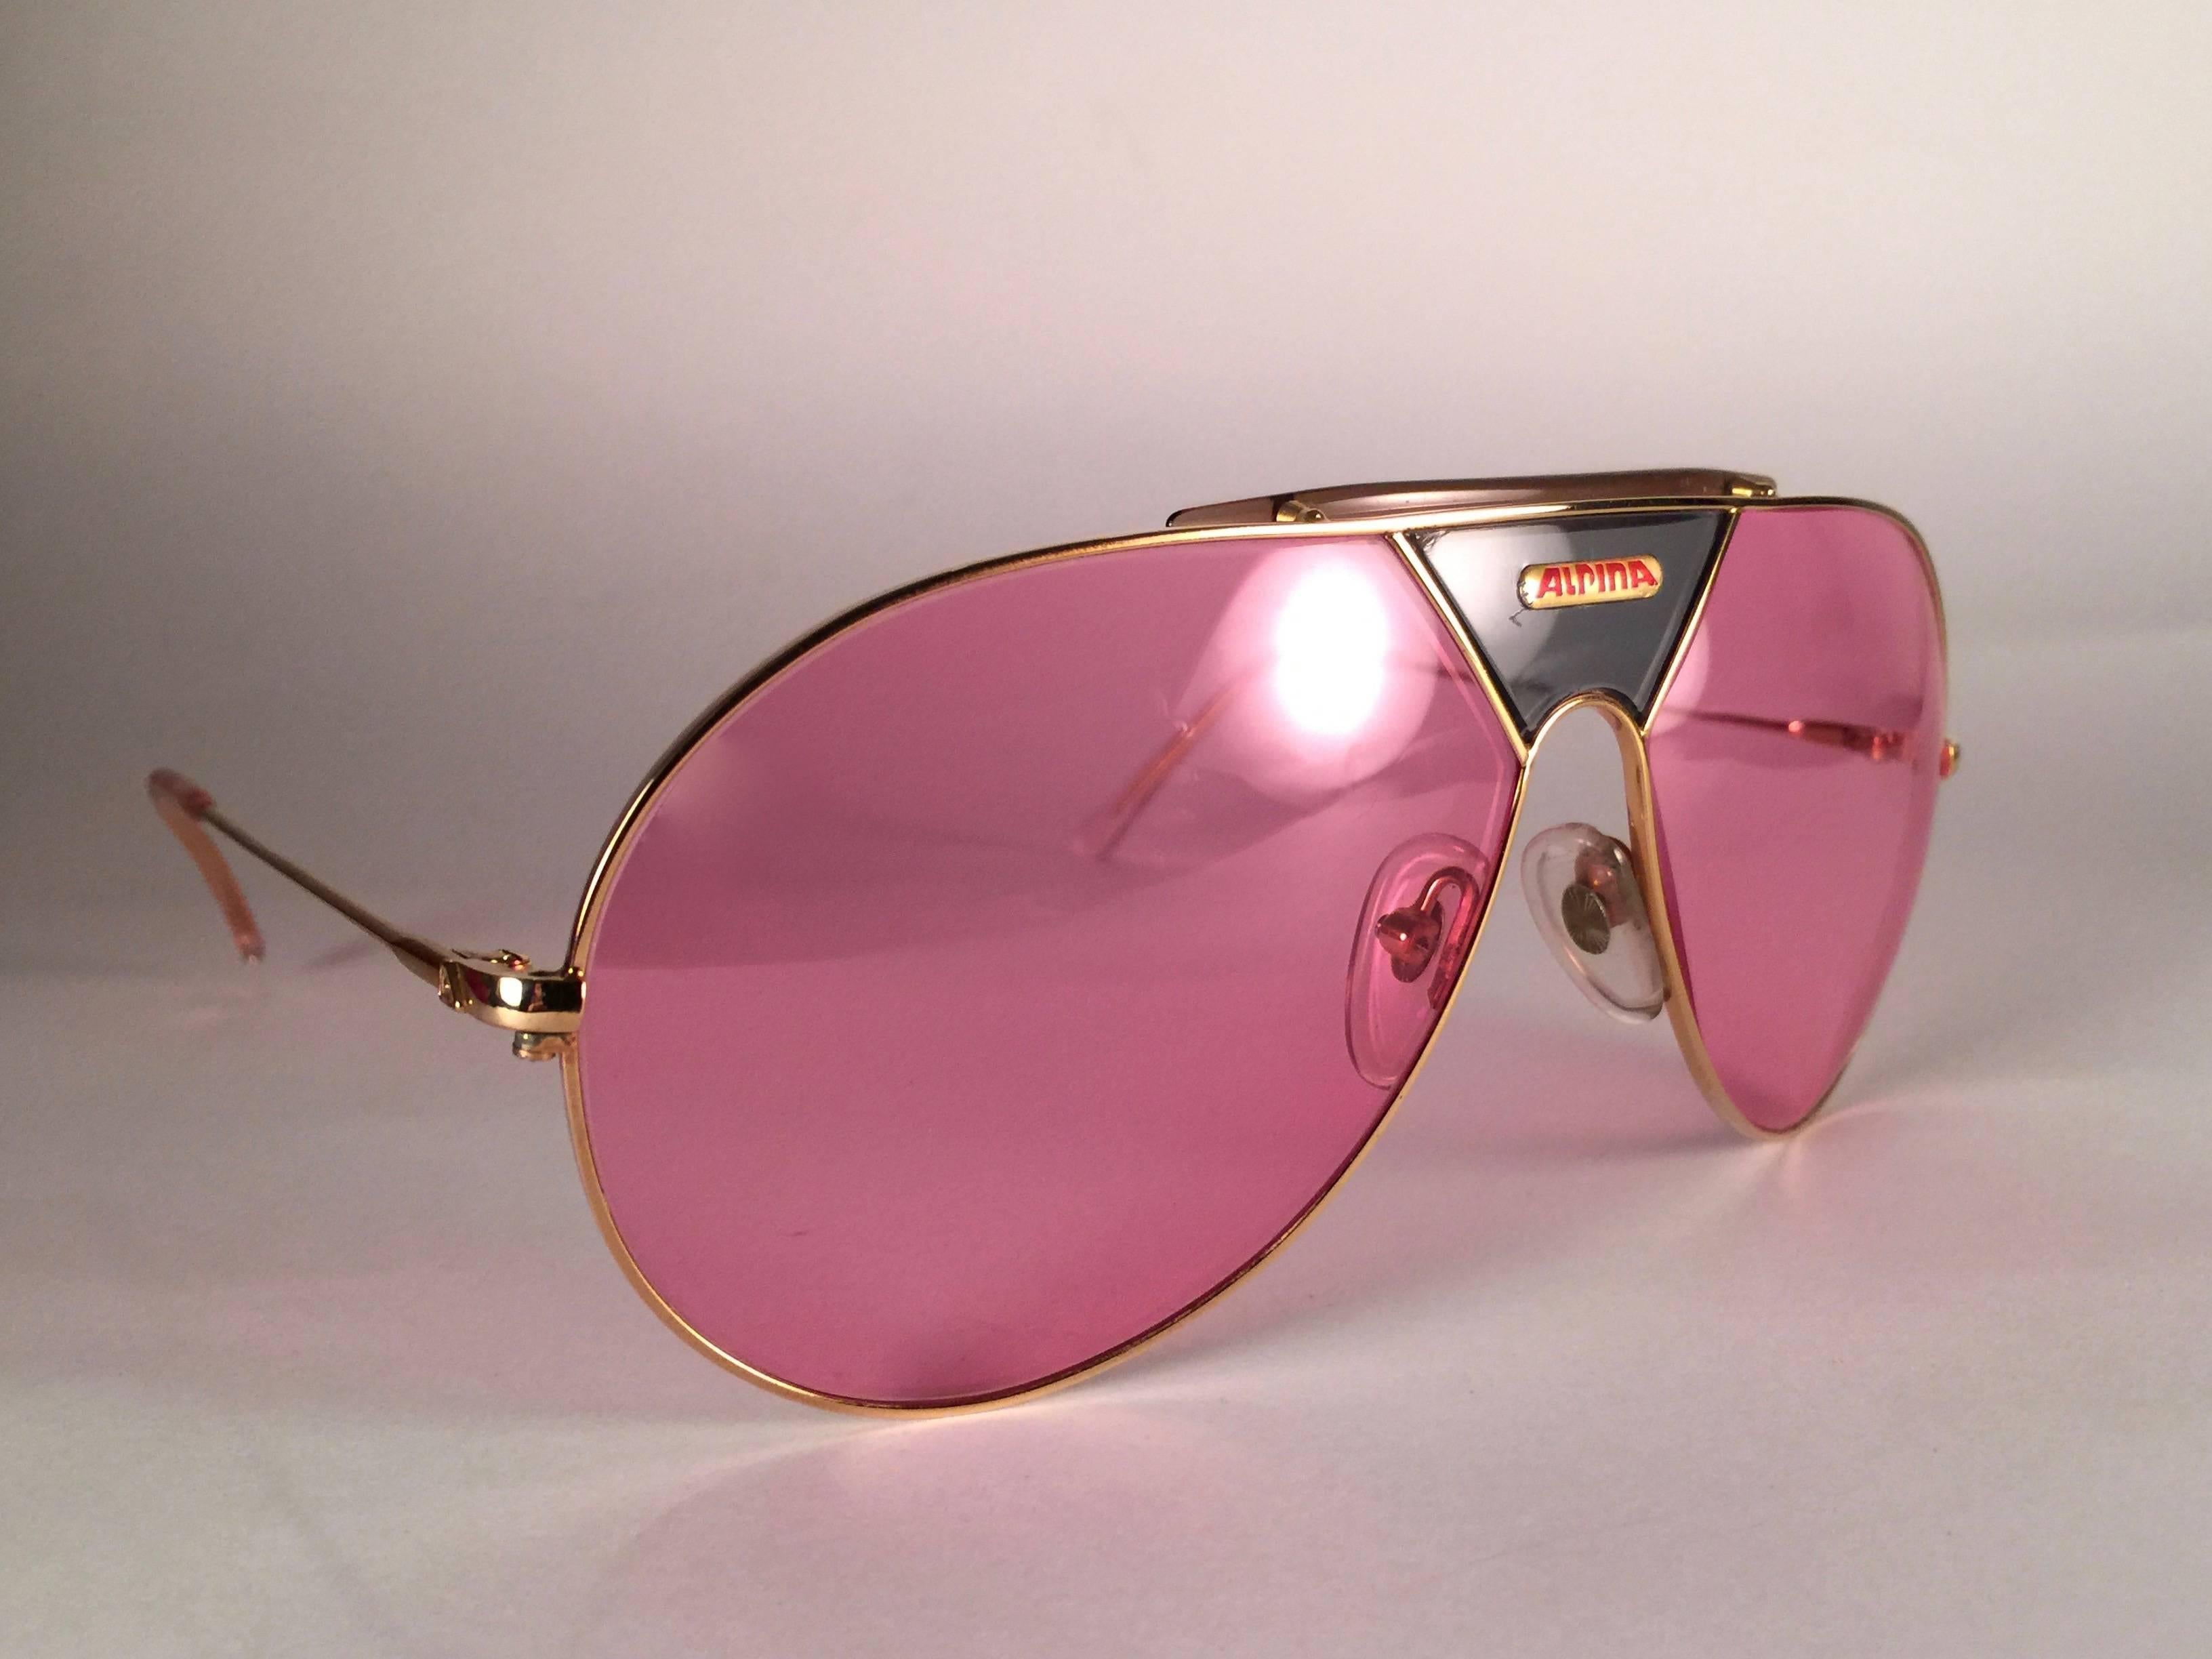 New Vintage Alpina TR4 Aviator Sunglasses. Gold frame with green insert and candy pink lenses.
This pair has a minor flaw near the Alpina logo area.
The very same model worn by Don Johnson in Miami Vice in the 1980's.
Made in West Germany.